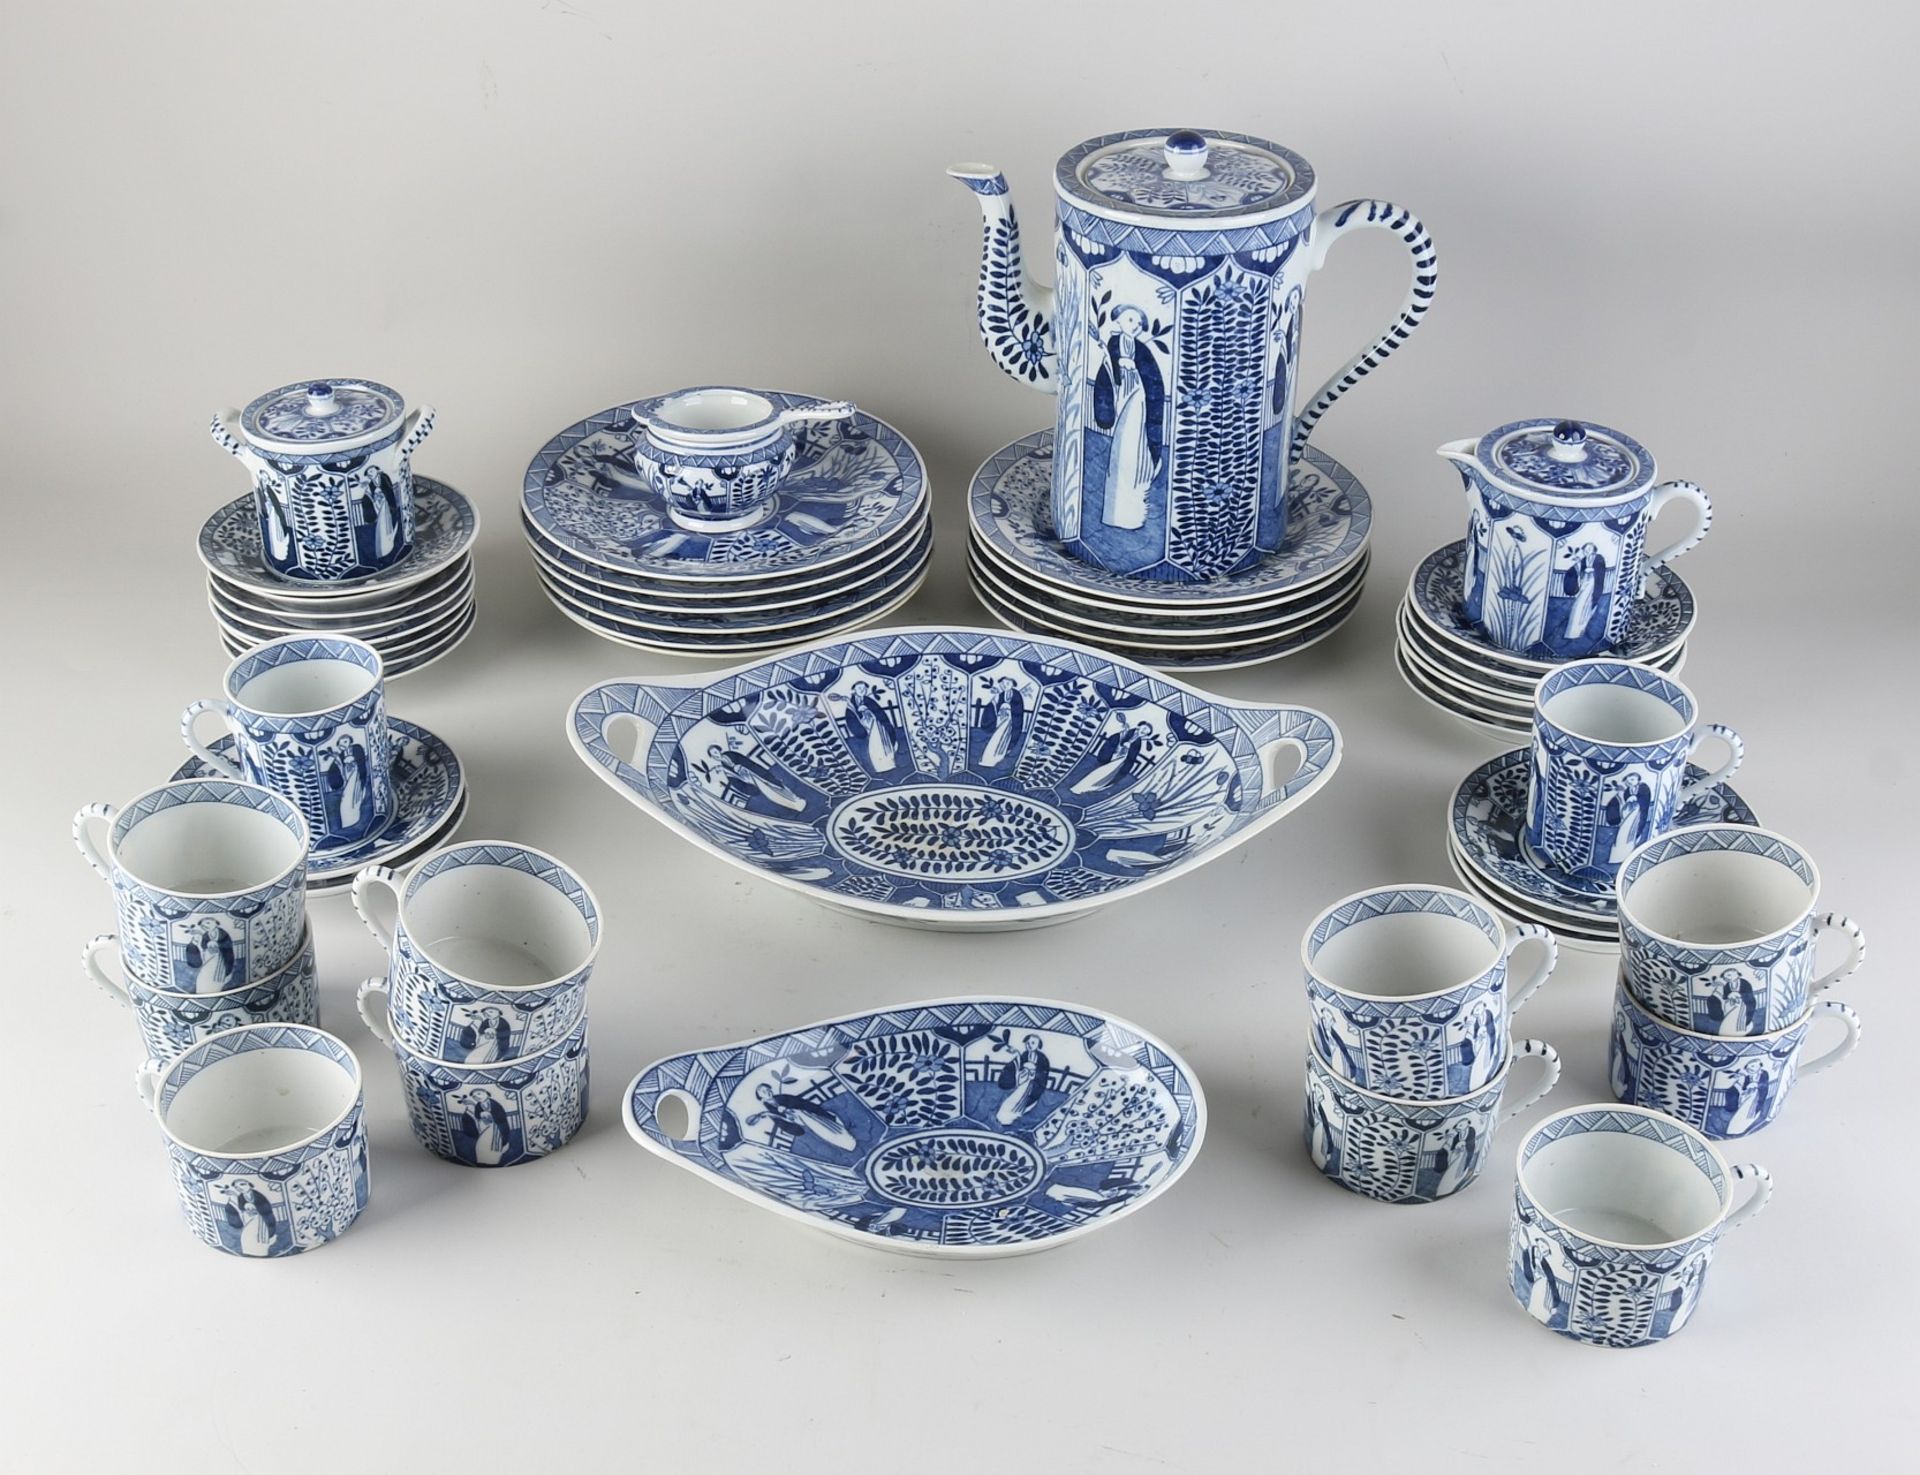 Antique tableware with Long List decor